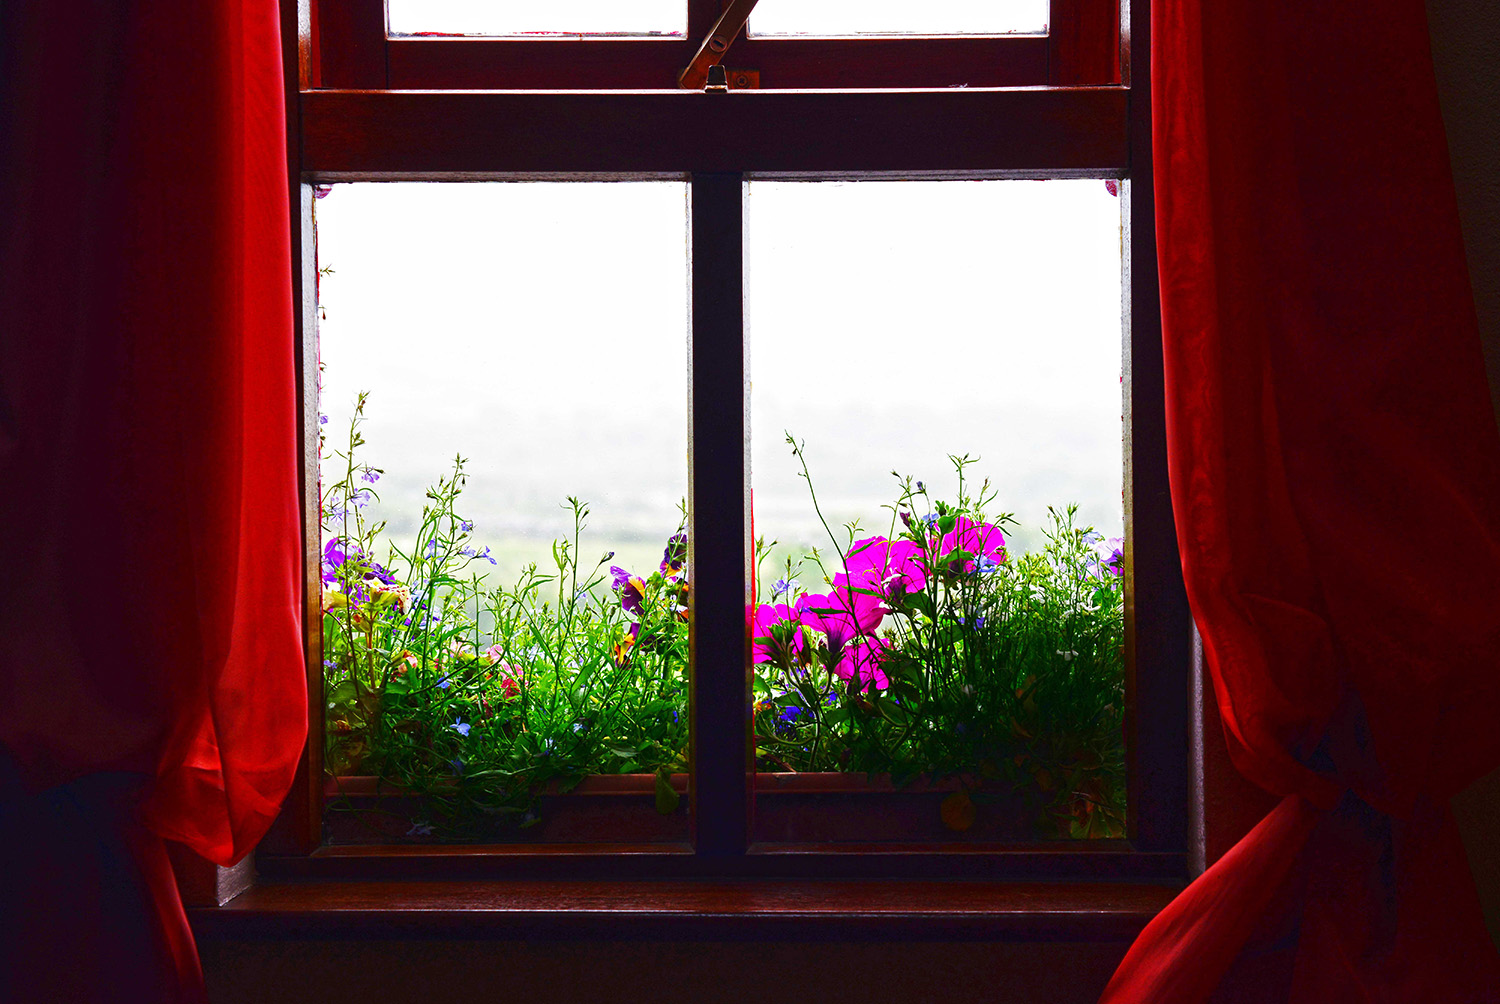 Architecture_Window_County_Clare_Red_Curtains_Flower_Box_Travel_Ireland.jpg